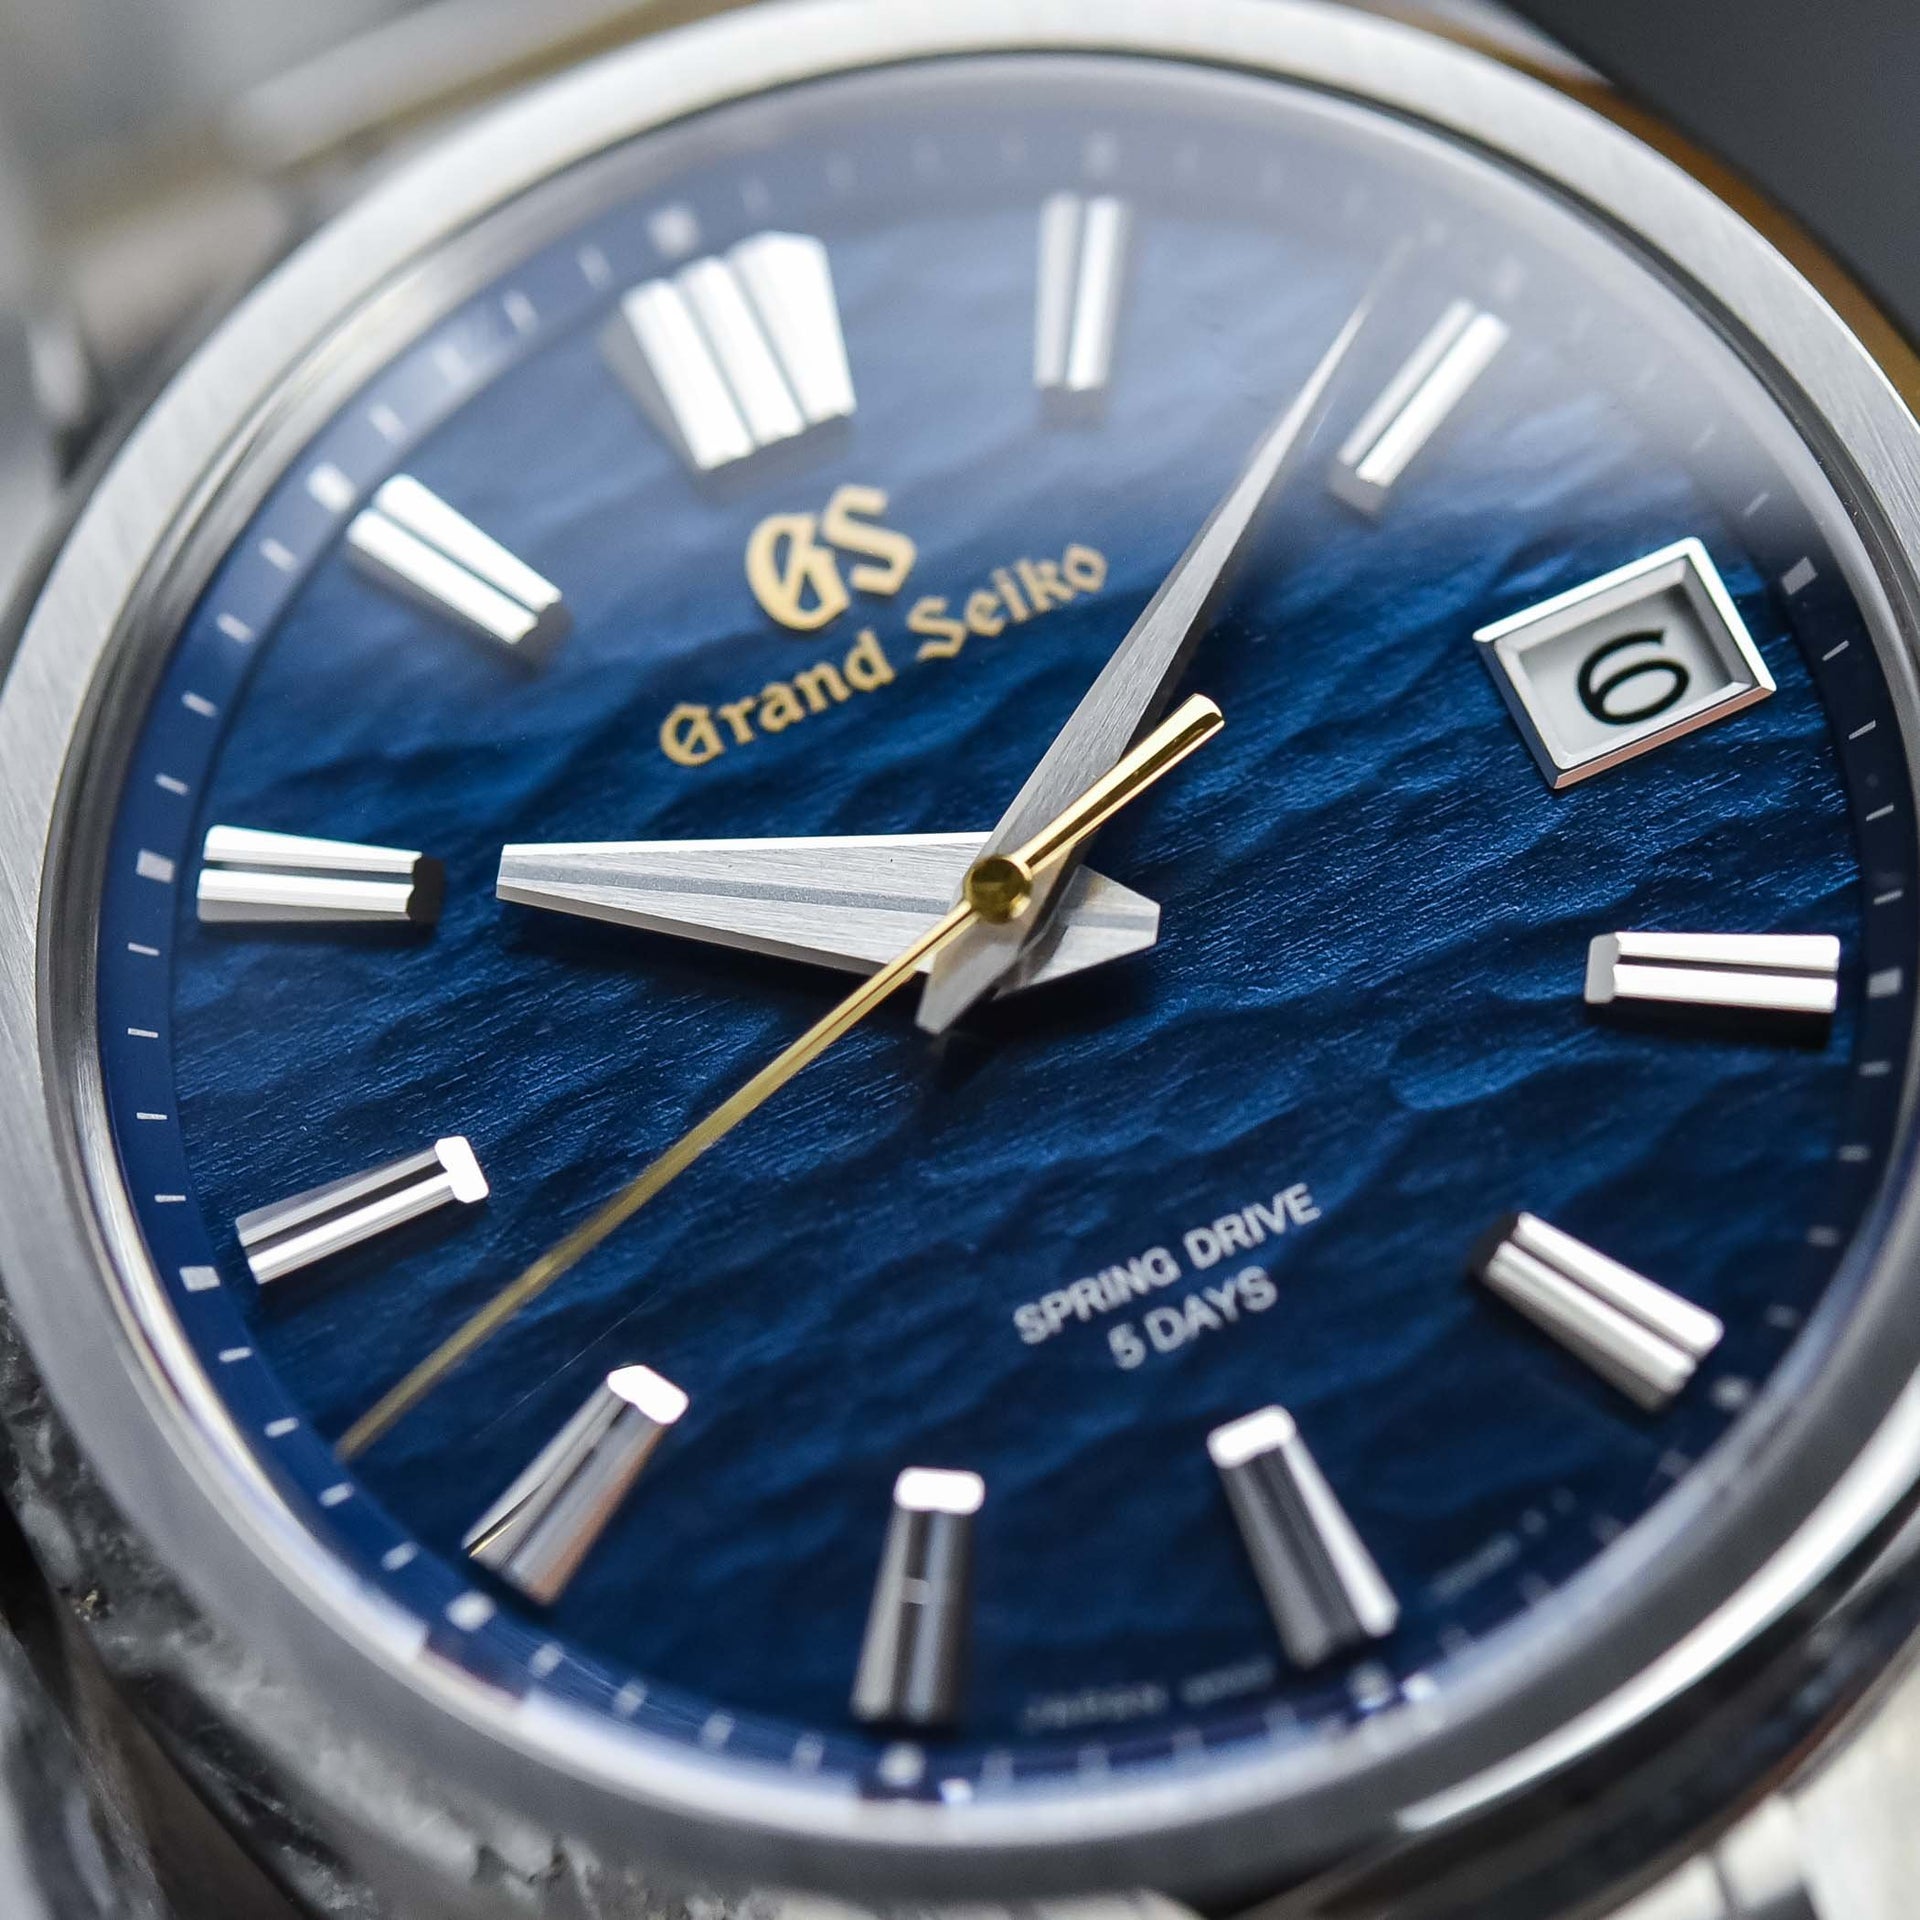 NEW and UPCOMING Grand Seiko watches** | Page 75 | WatchUSeek Watch Forums